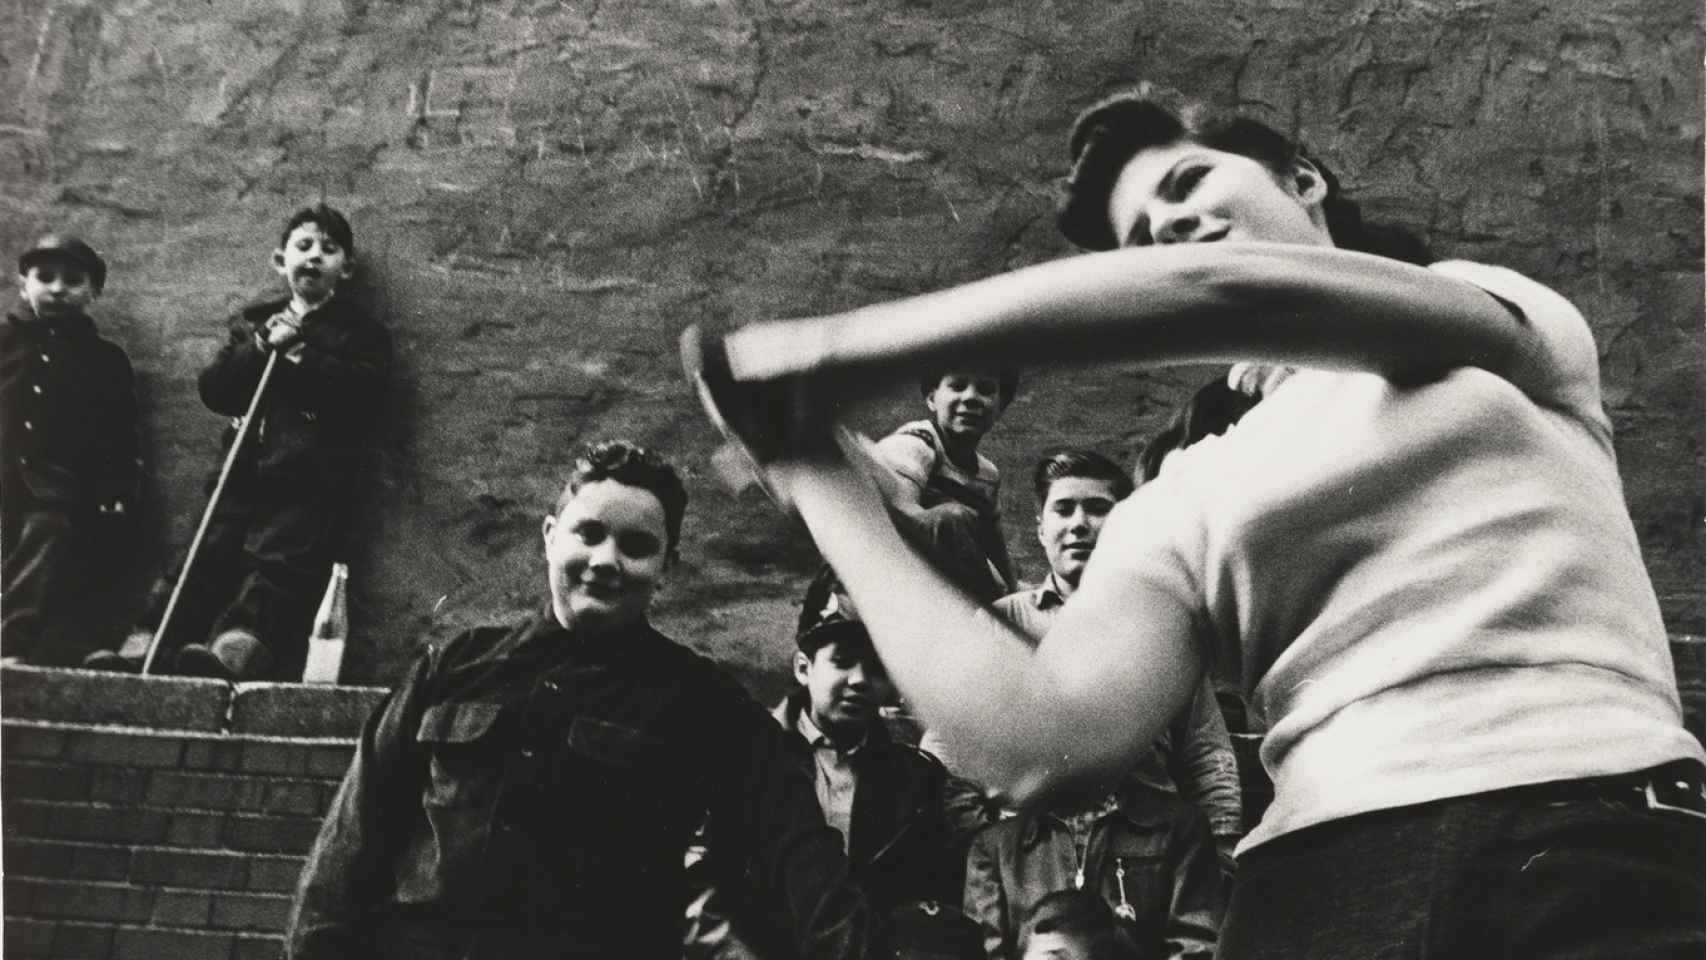 William Klein: 'Stickball Team Portrait, 40th Street between 2nd and 3rd Avenues', 1954-55